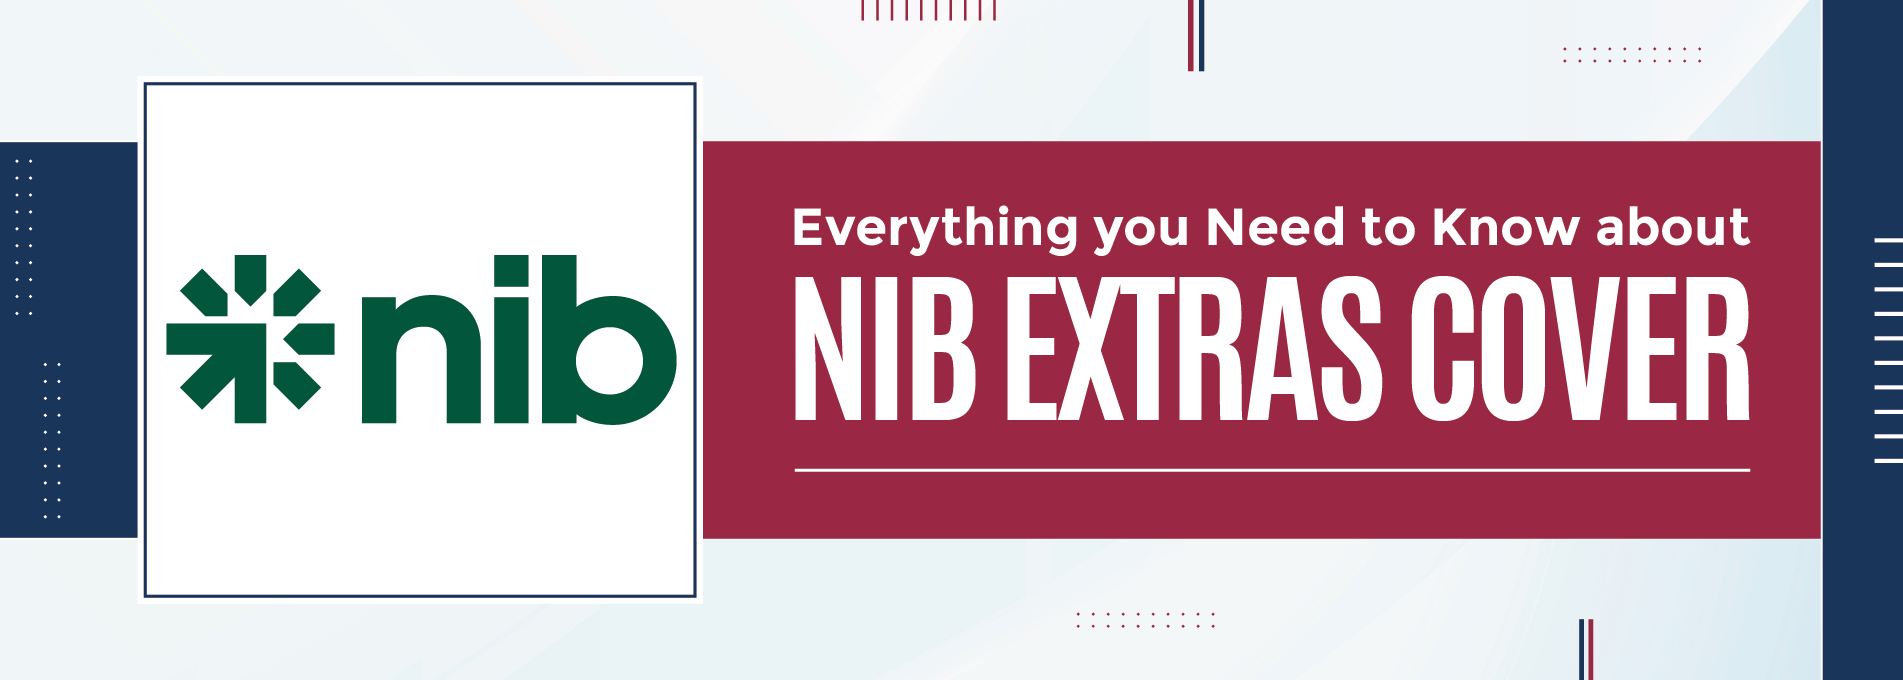 Everything you Need to Know about NIB Extras Cover